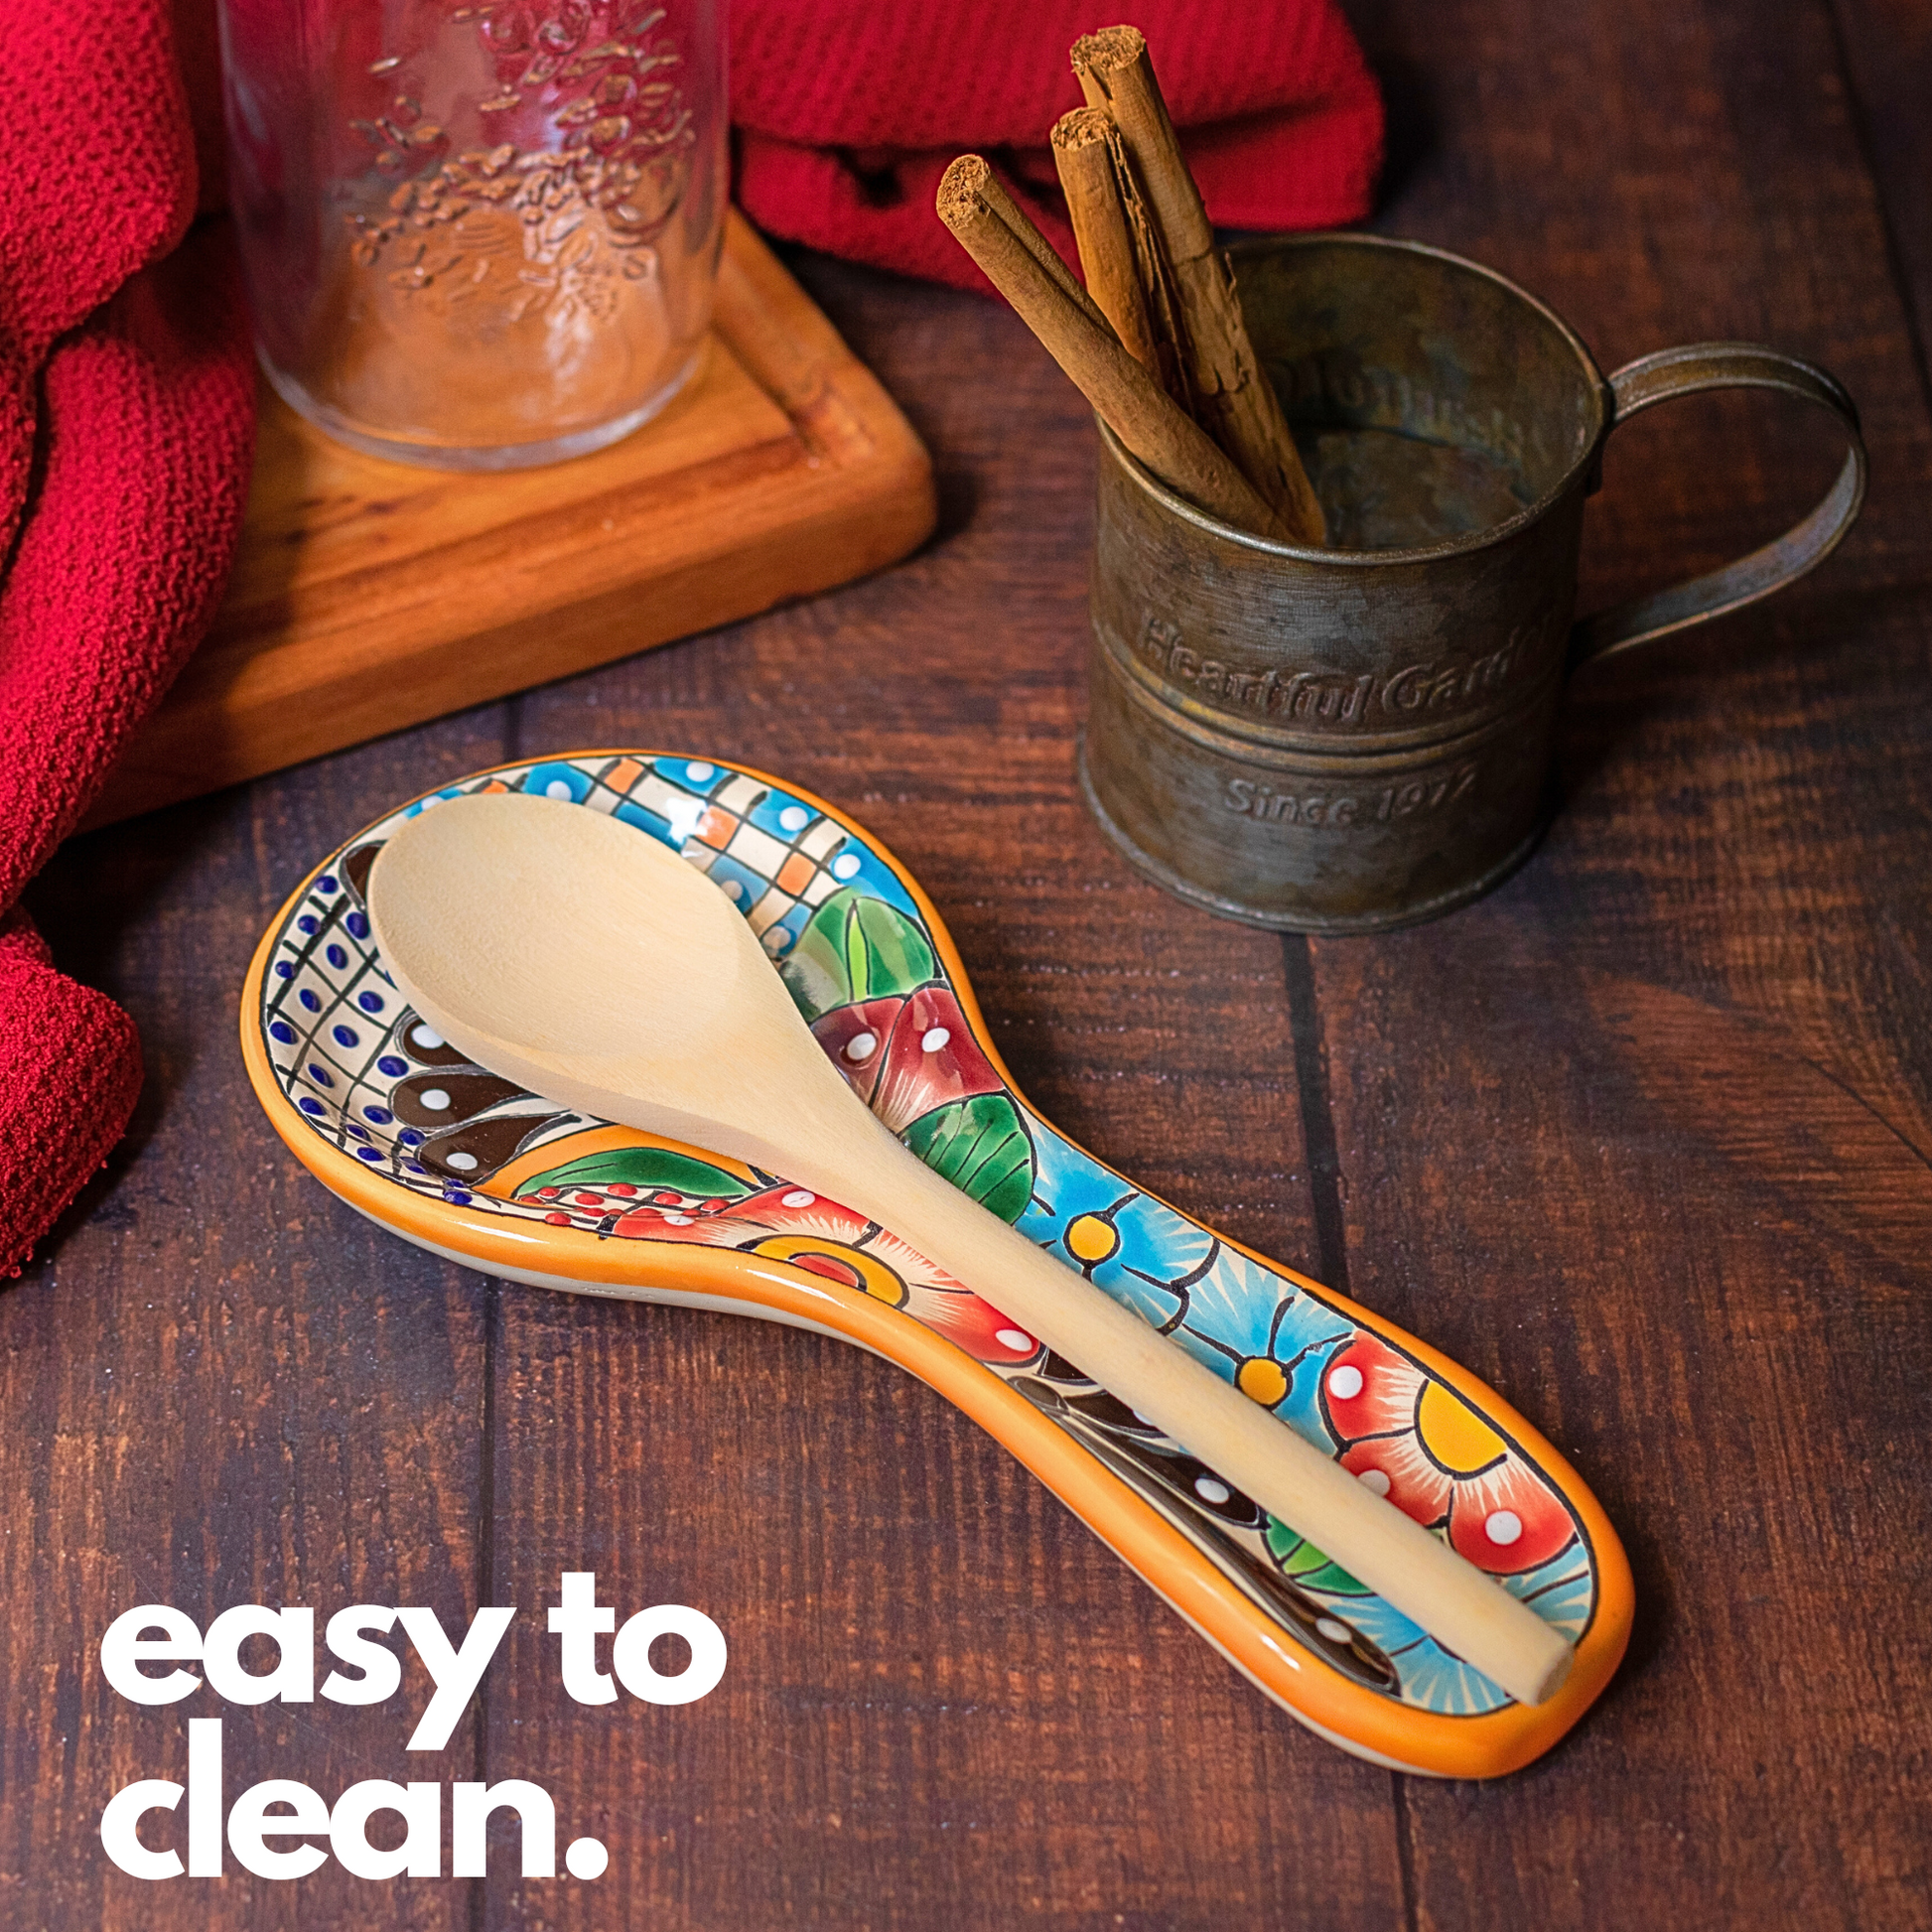 Colorful Kitchen Ceramic Spoon Rest - Hand Painted - Mexican Style